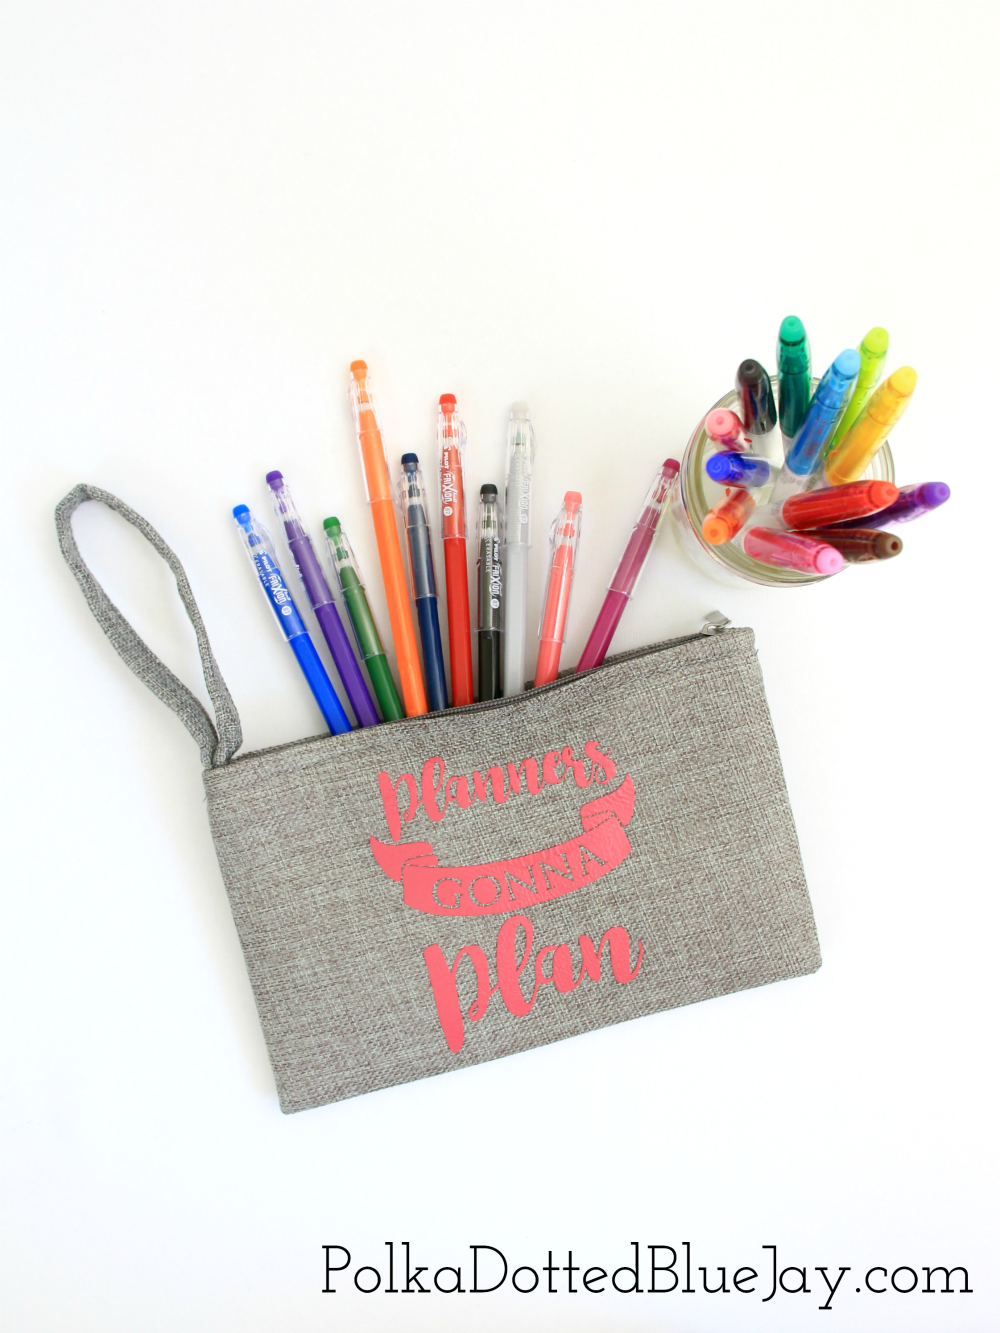 https://polkadottedbluejay.com/wp-content/uploads/2017/08/DIY-Pen-Pouch-Craft-Project.png